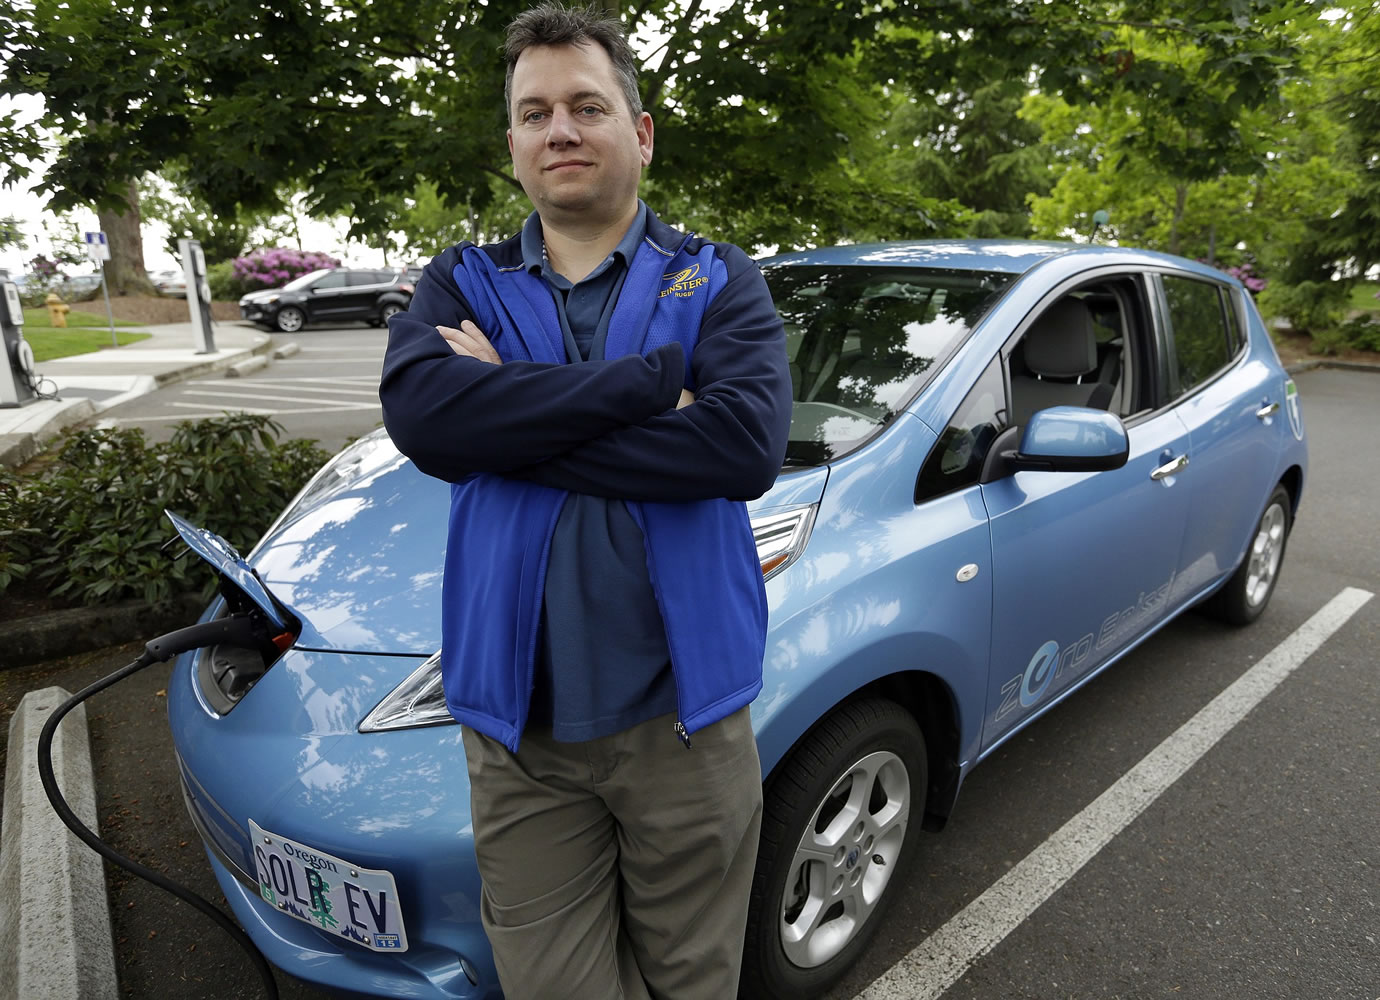 Patrick Conner, who has been driving an electric car since 2007, poses with his Nissan Leaf at a charging station at the public library in Hillsboro, Ore., Tuesday, May 19, 2015.    Fuel-efficient, hybrid and electric cars are a boon for the environment, but their growing popularity means shrinking fuel tax revenues for state coffers and less money to pay for road and bridge projects. Oregon is about to embark on a first-in-the-nation program that aims to address this shortfall by testing the feasibility of taxing motorists not for the fuel they use, but for the miles they drive.